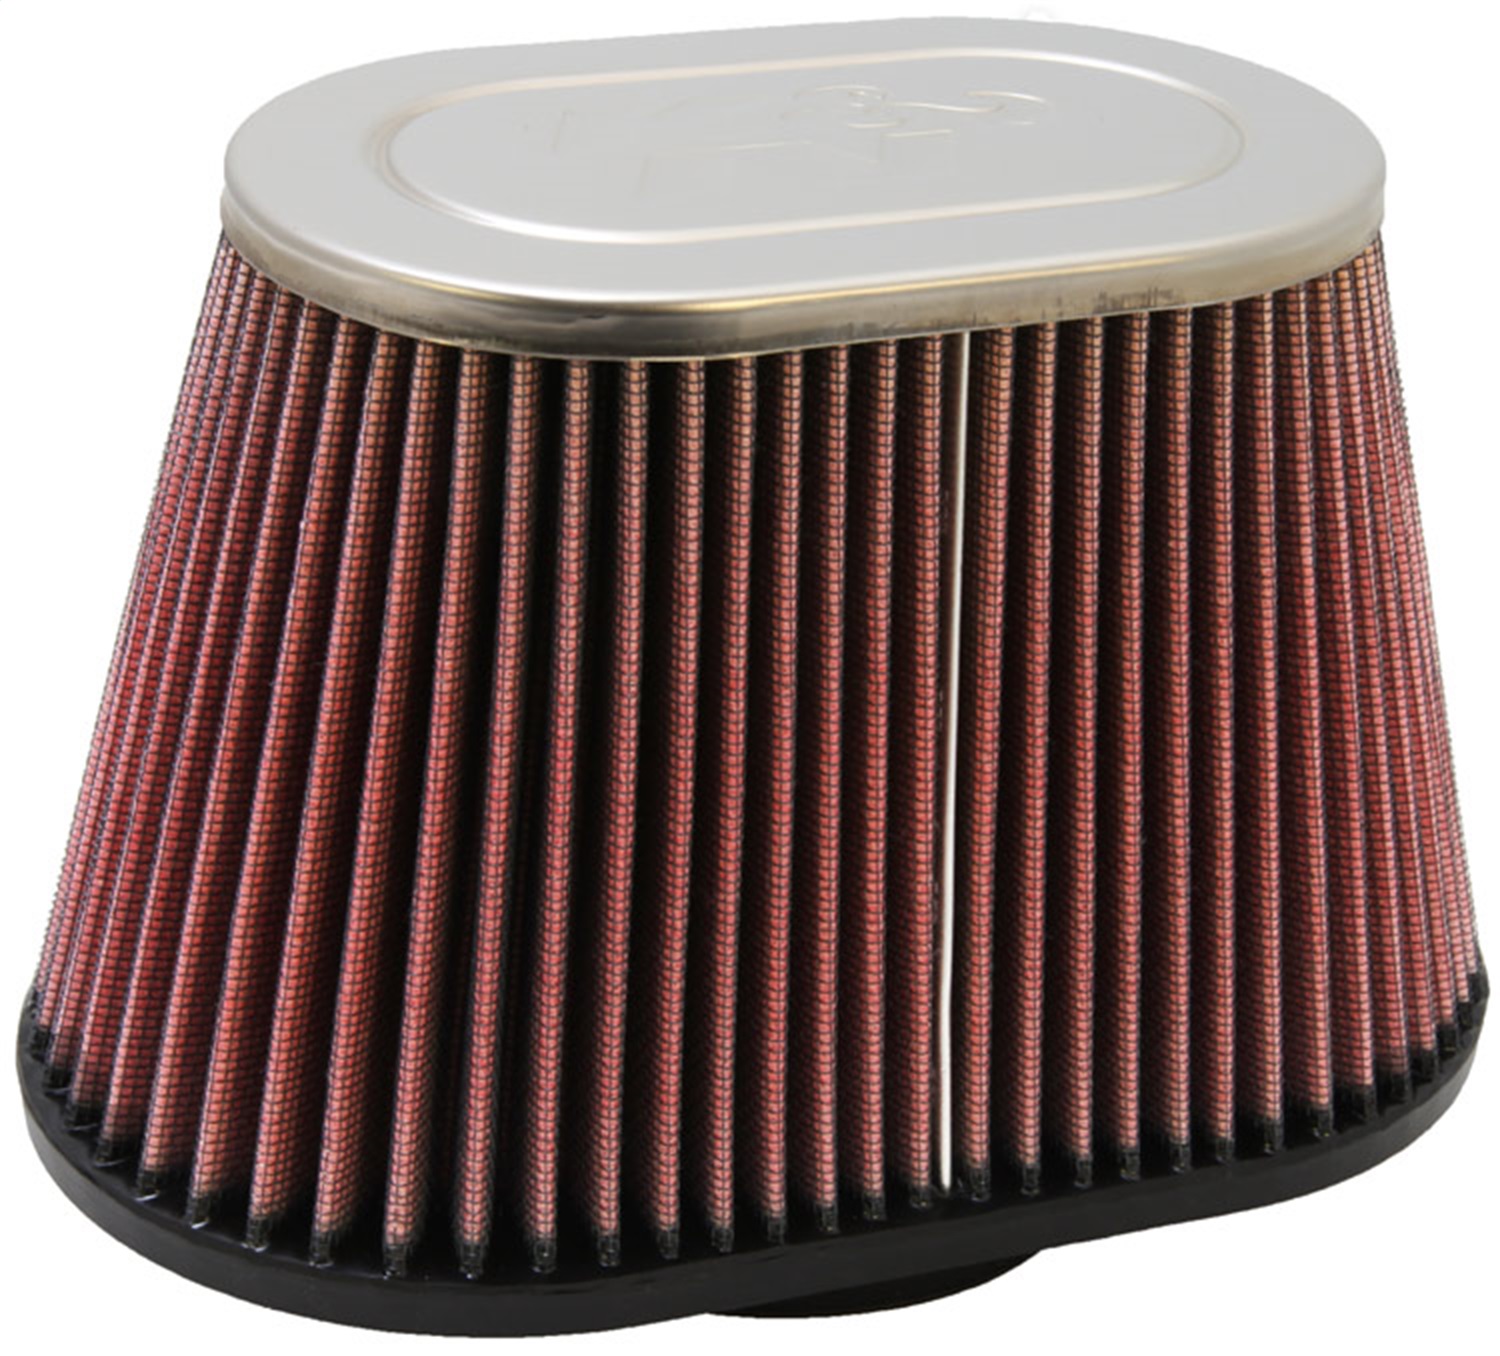 K&N Filters K&N Filters RC-5040 Universal Air Cleaner Assembly